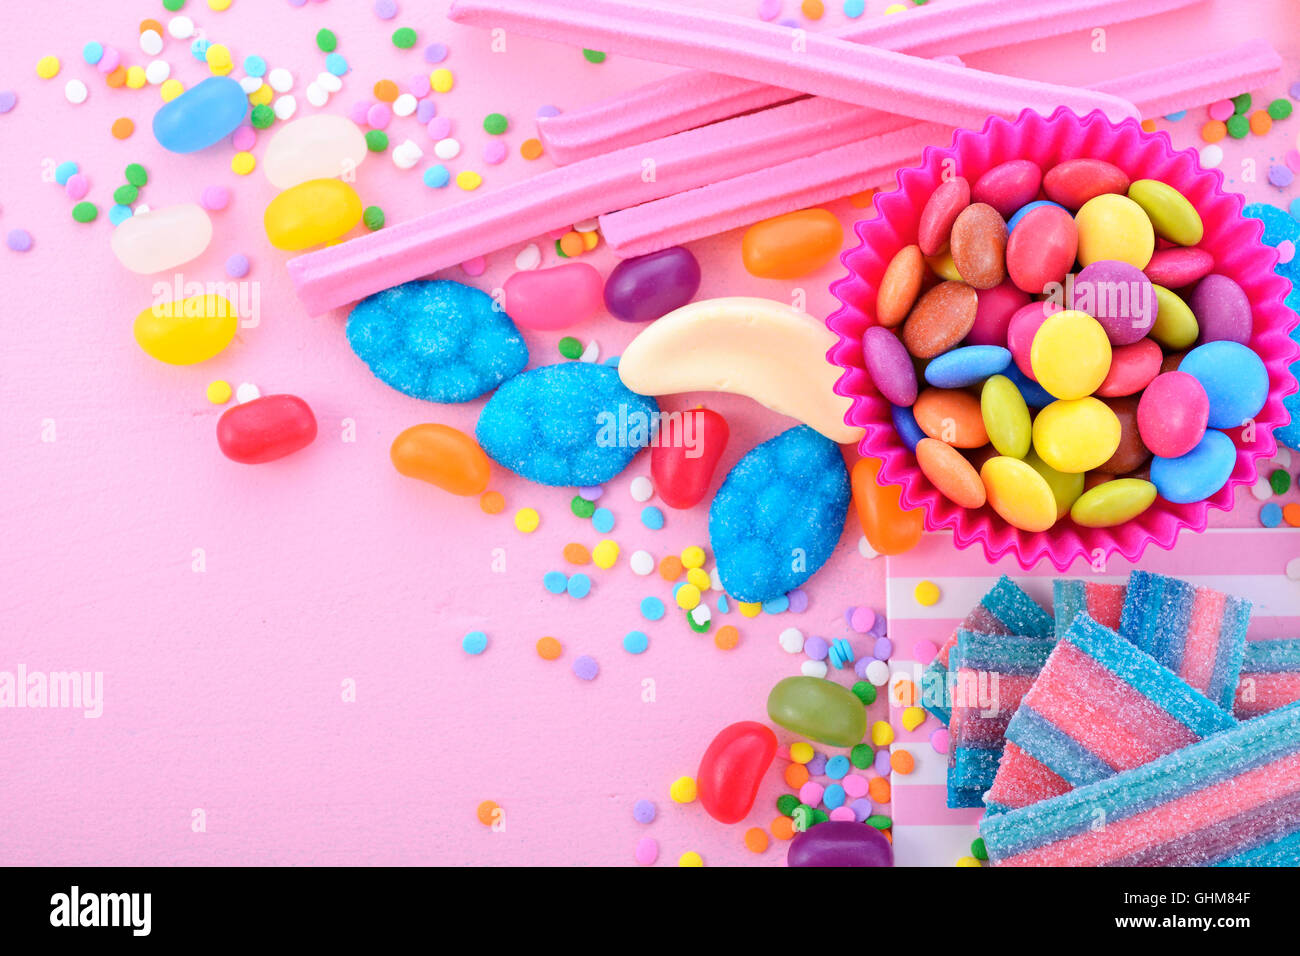 Bright colorful candy background on pink wood table for Halloween trick of treat or childrens birthday party favors, closeup. Stock Photo